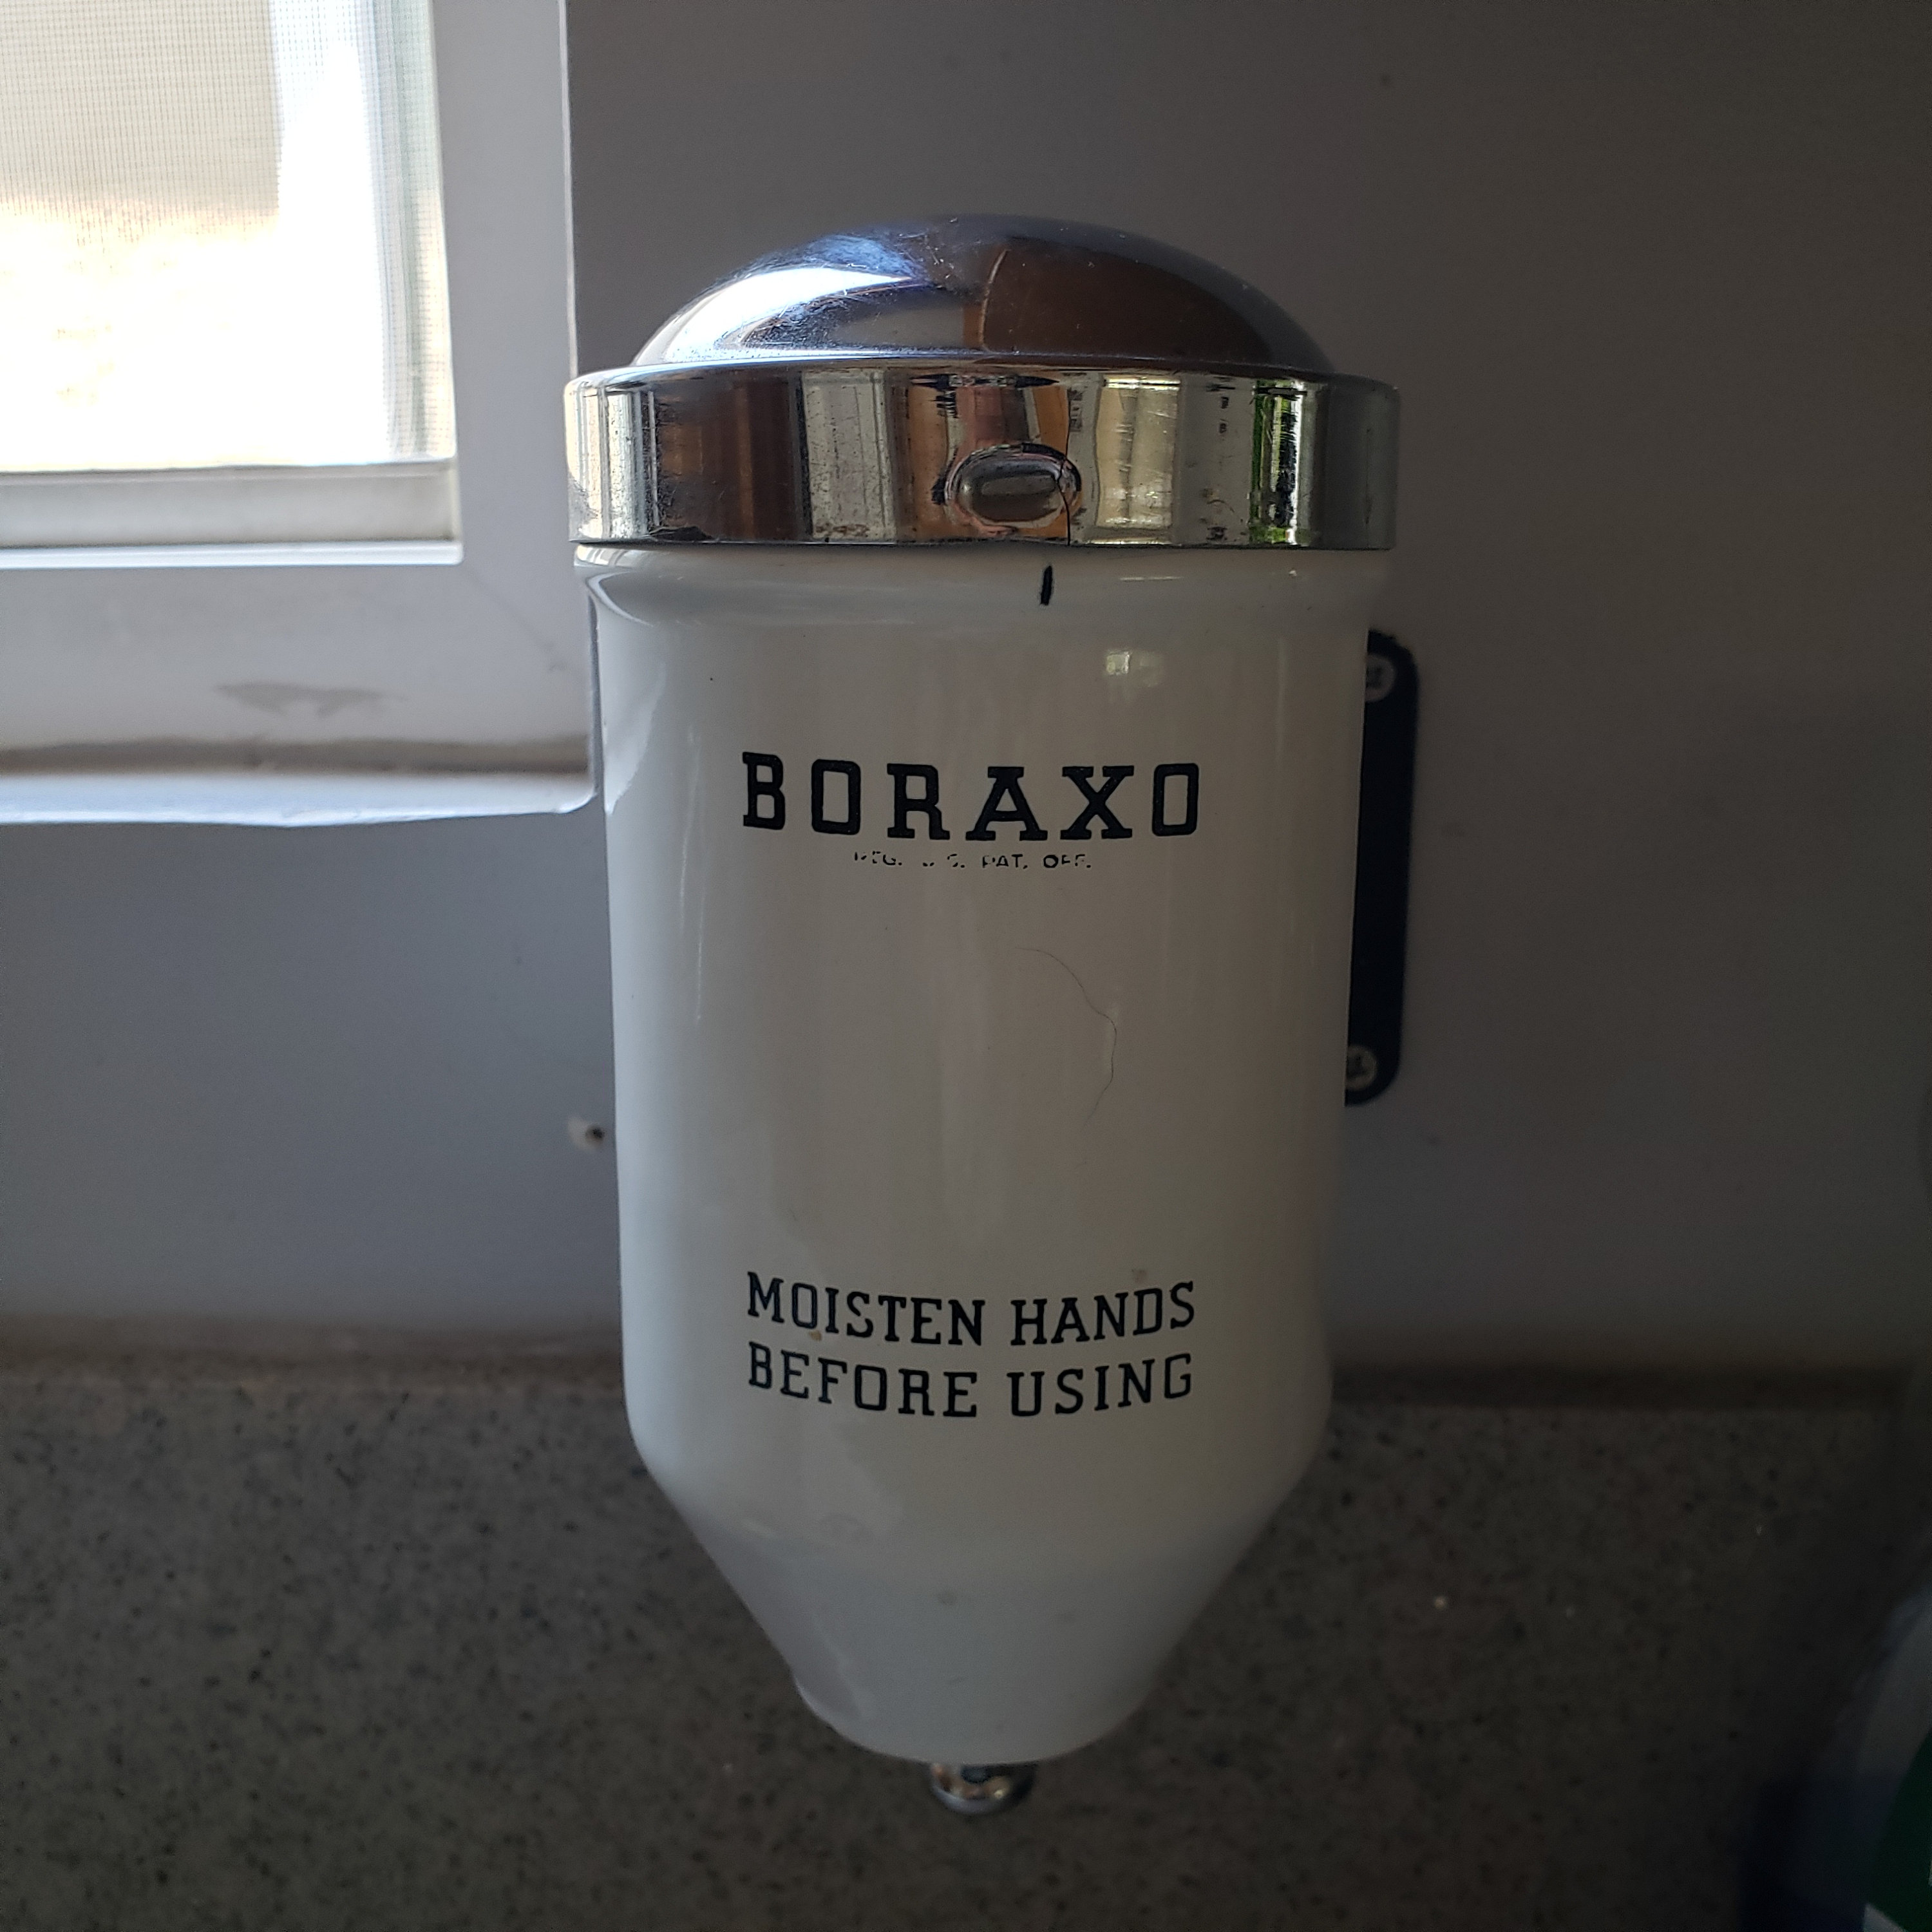 Vintage Boraxo Powdered Hand Soap for Sale in Gilbert, AZ - OfferUp